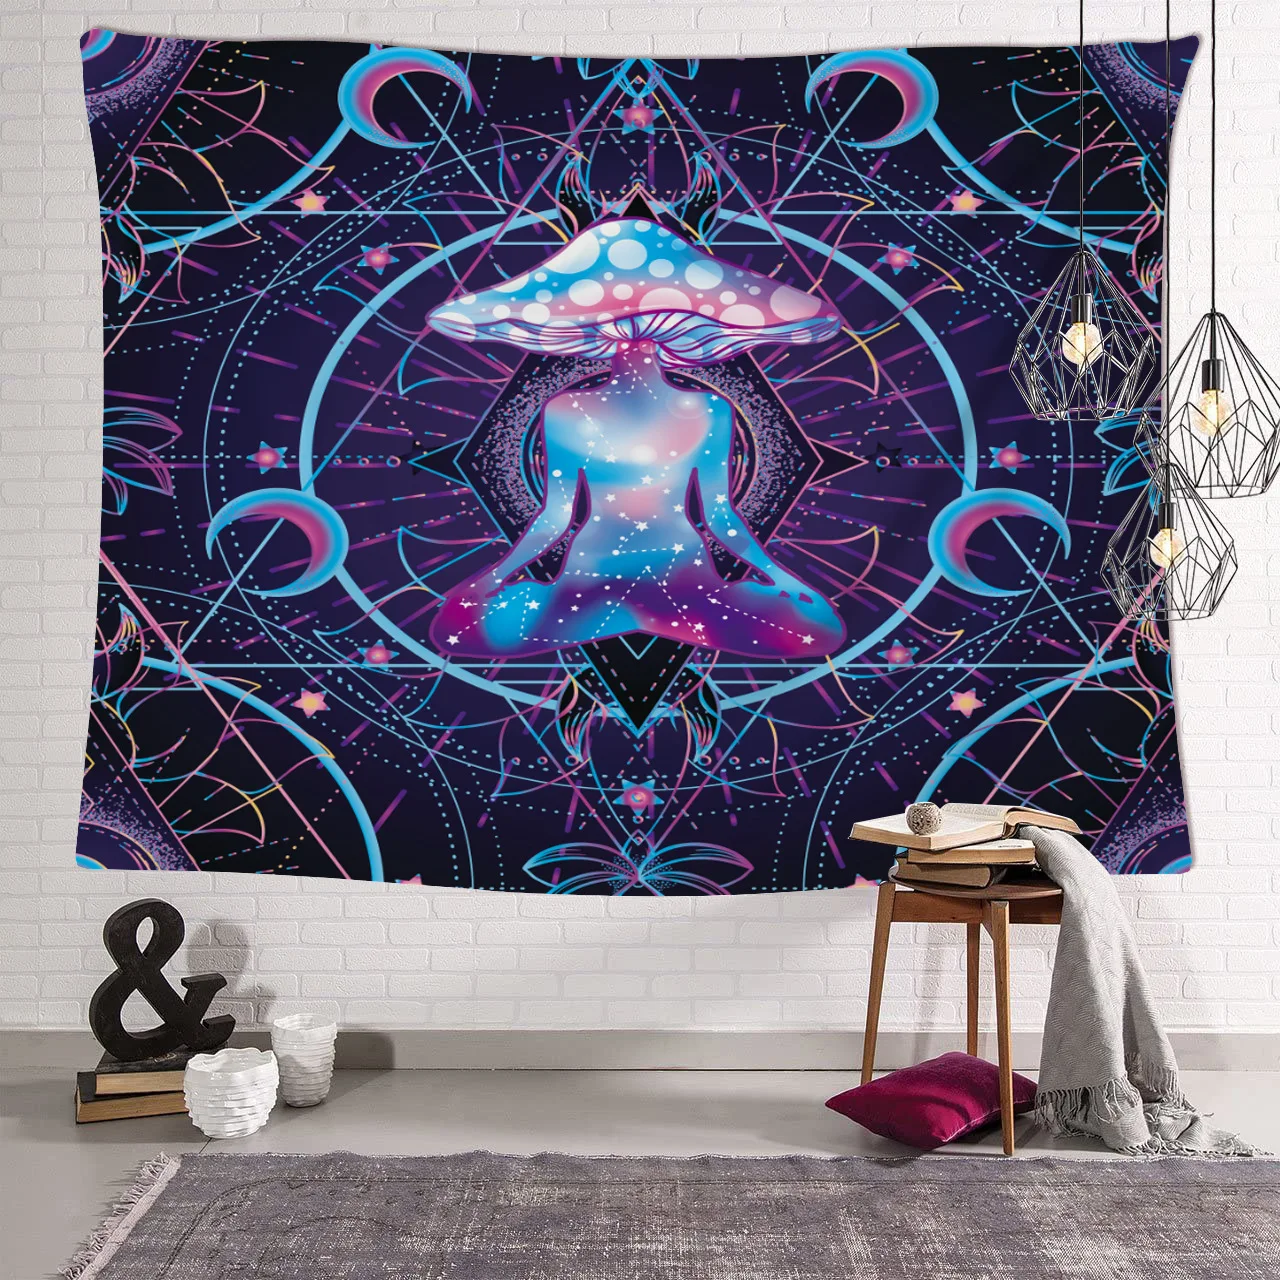 

Psychedelic Mandala Tapestry Wall Hanging Bohemian Hippie Witchcraft TAPIZ Art Science Fiction Tarot Room Home Decor